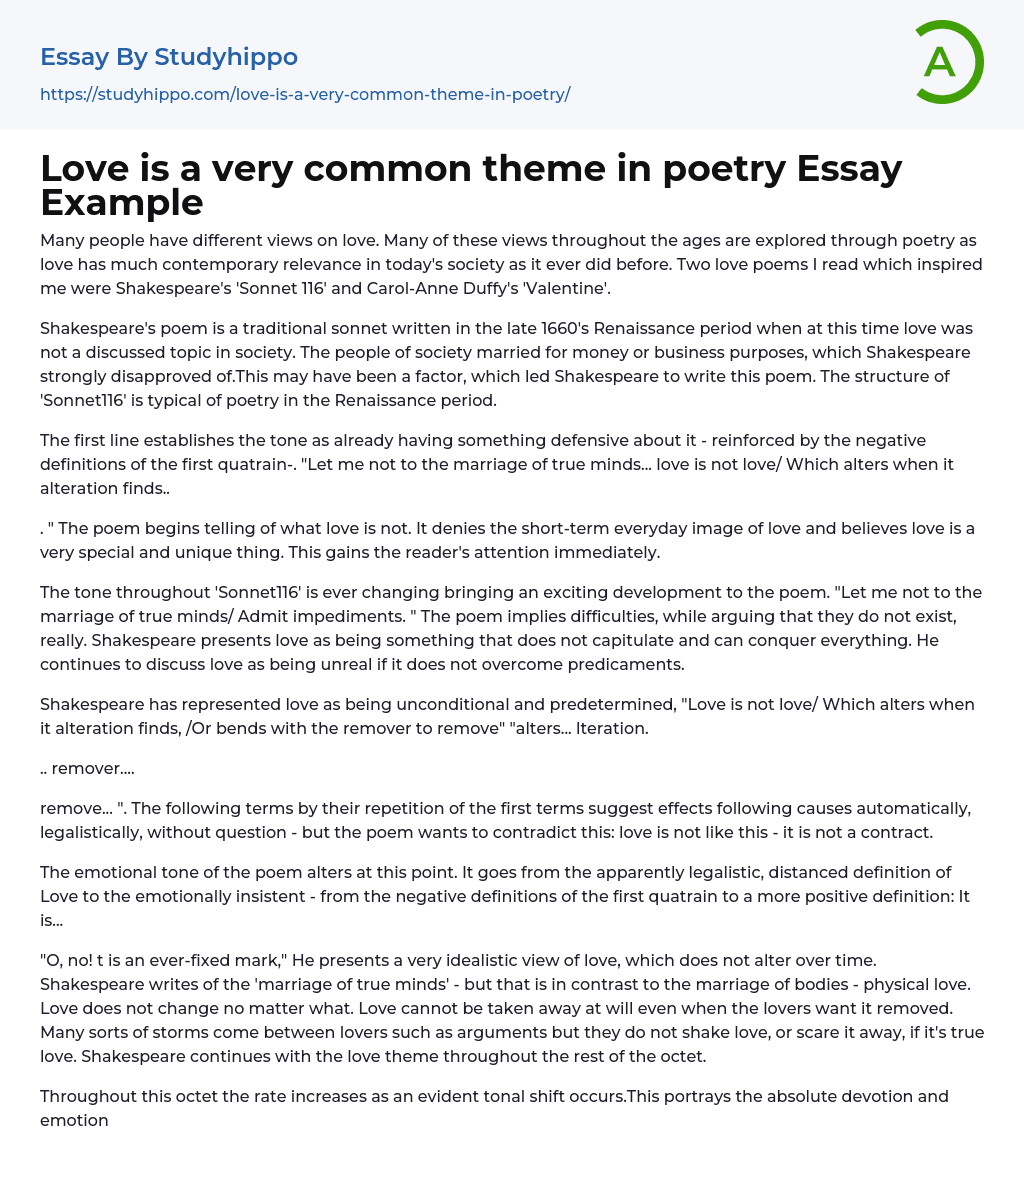 Love is a very common theme in poetry Essay Example